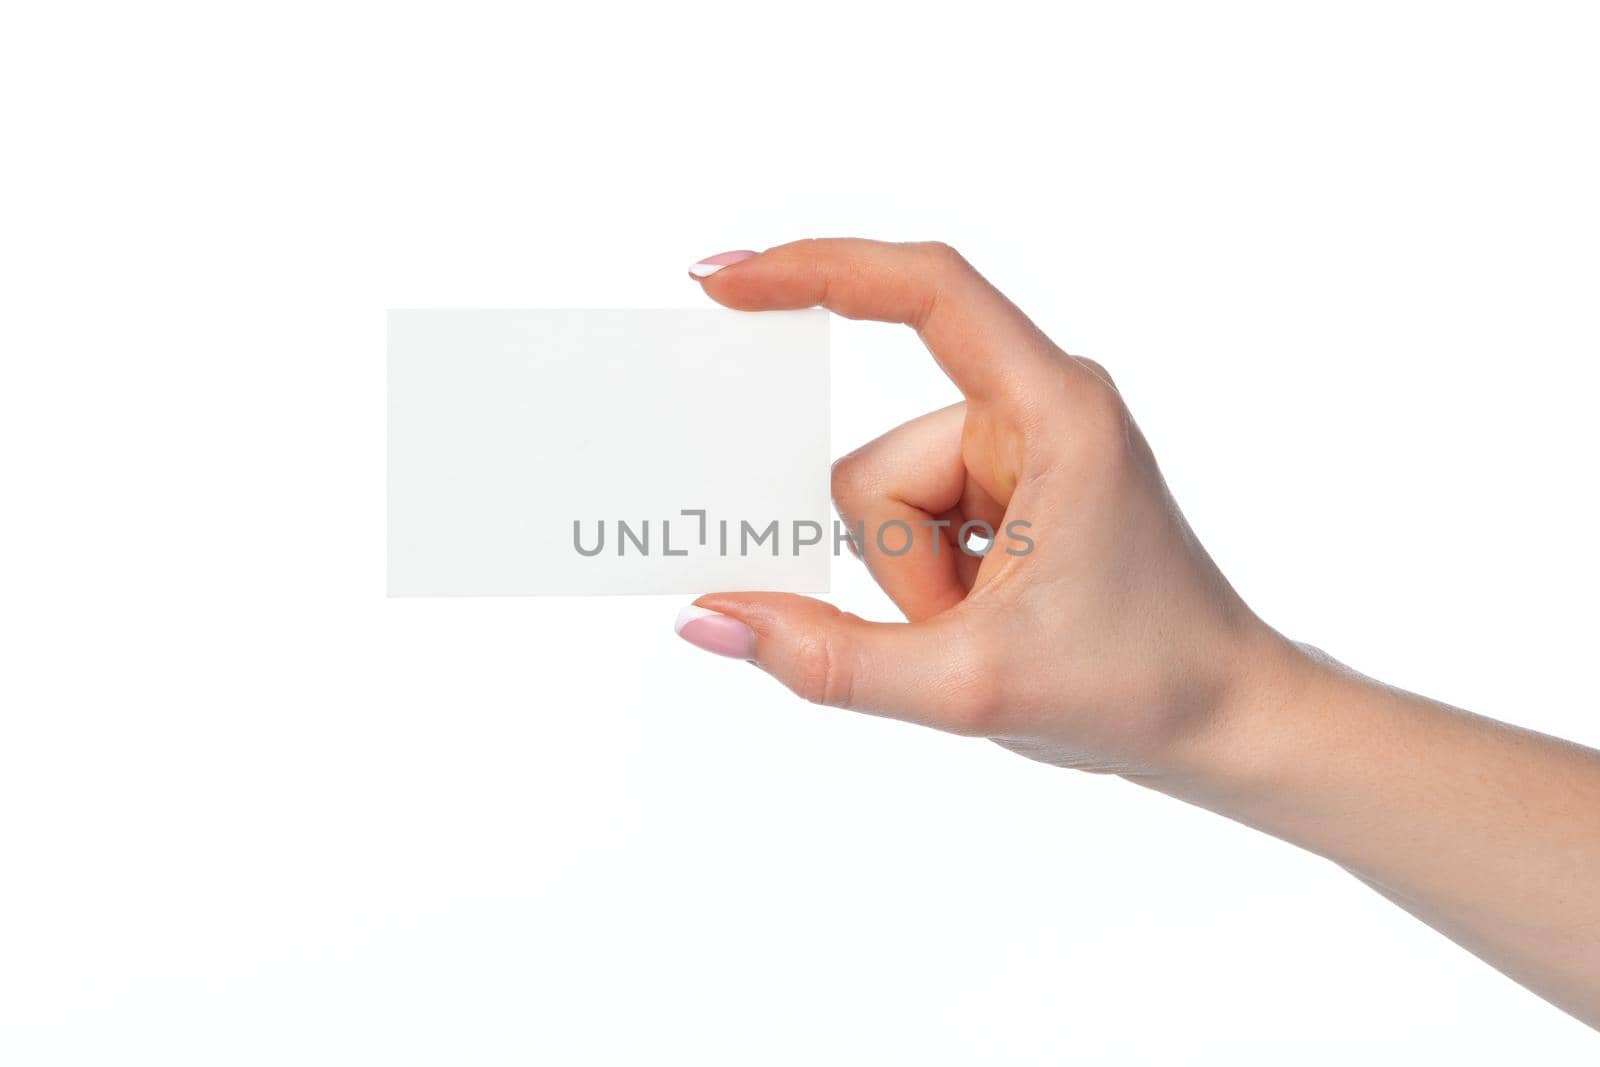 Female hand with blank white business card isolated on white background